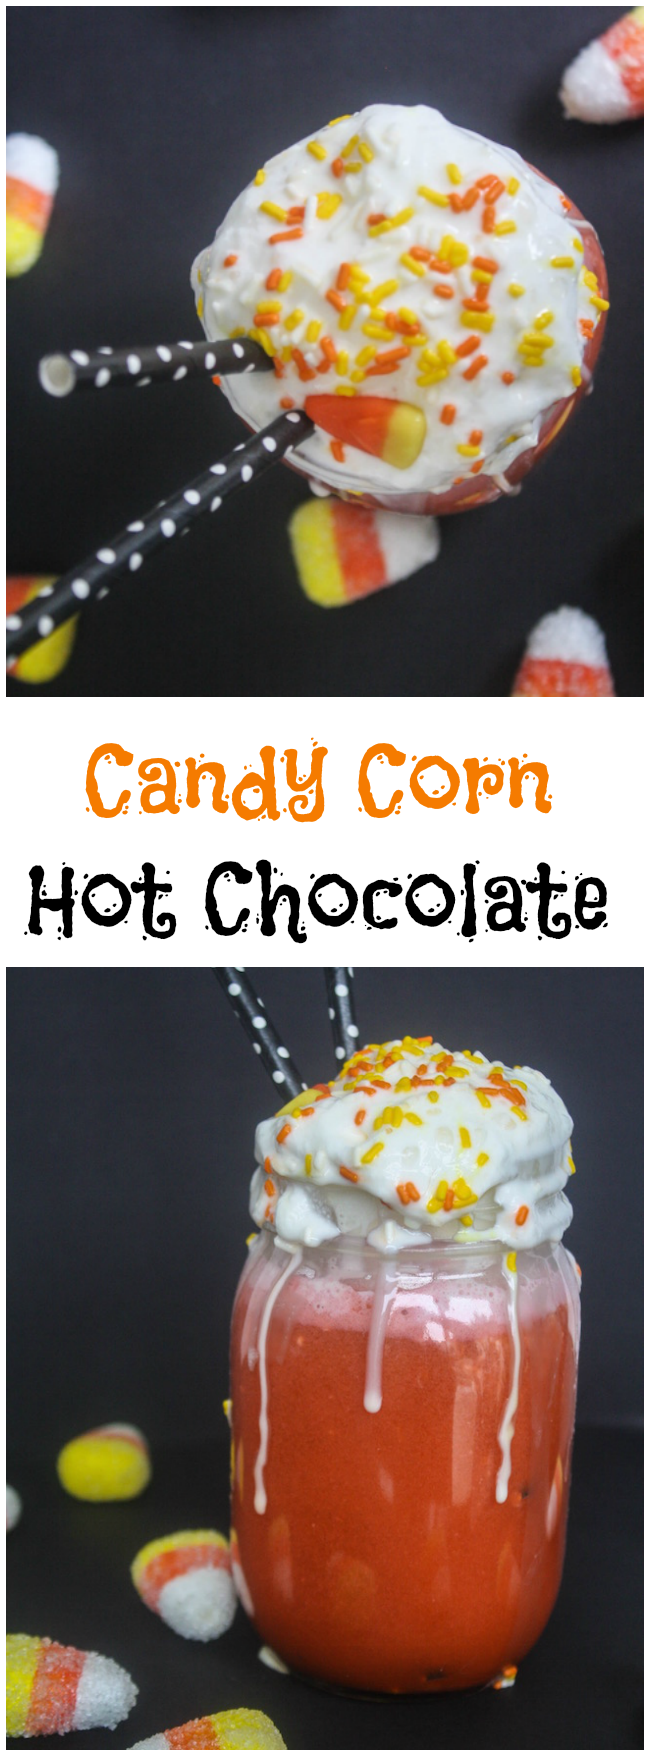 Since we just shared a Carved Pumpkin Cookie recipe, how about some Candy Corn Hot Chocolate recipe to wash it down with!